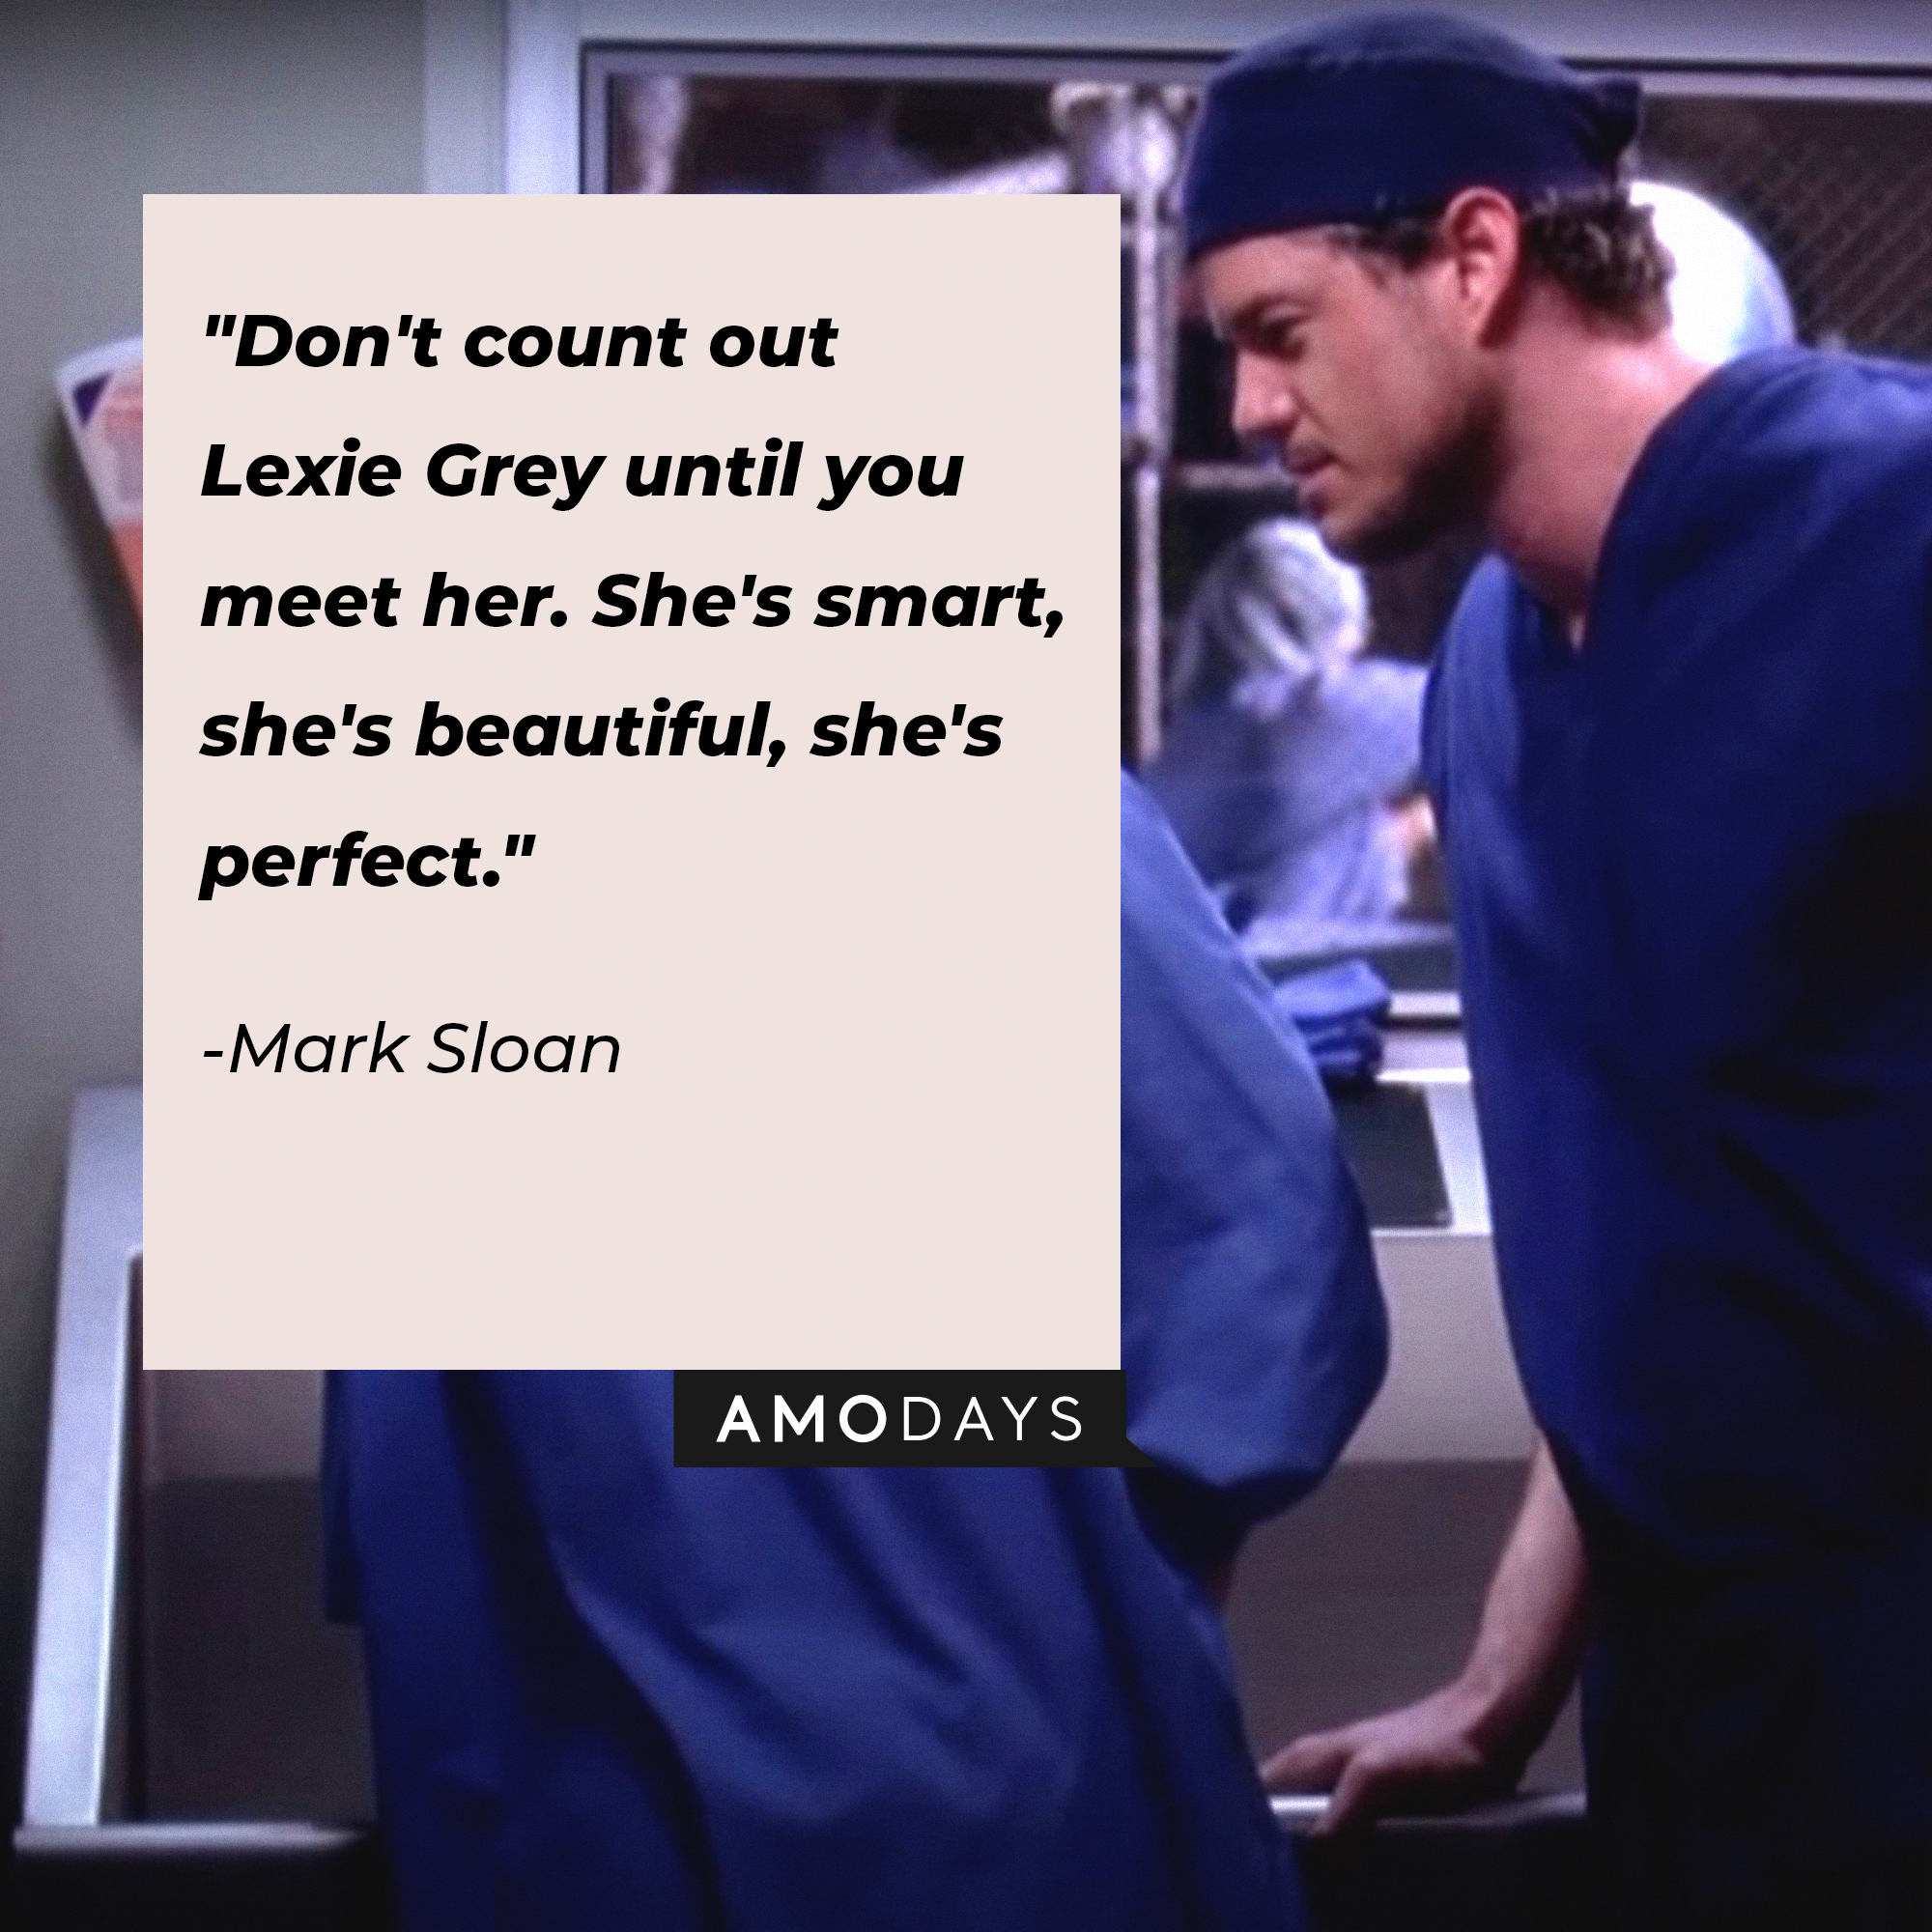 Mark Sloan's quote: "Don't count out Lexie Grey until you meet her. She's smart, she's beautiful, she's perfect." | Image: AmoDays